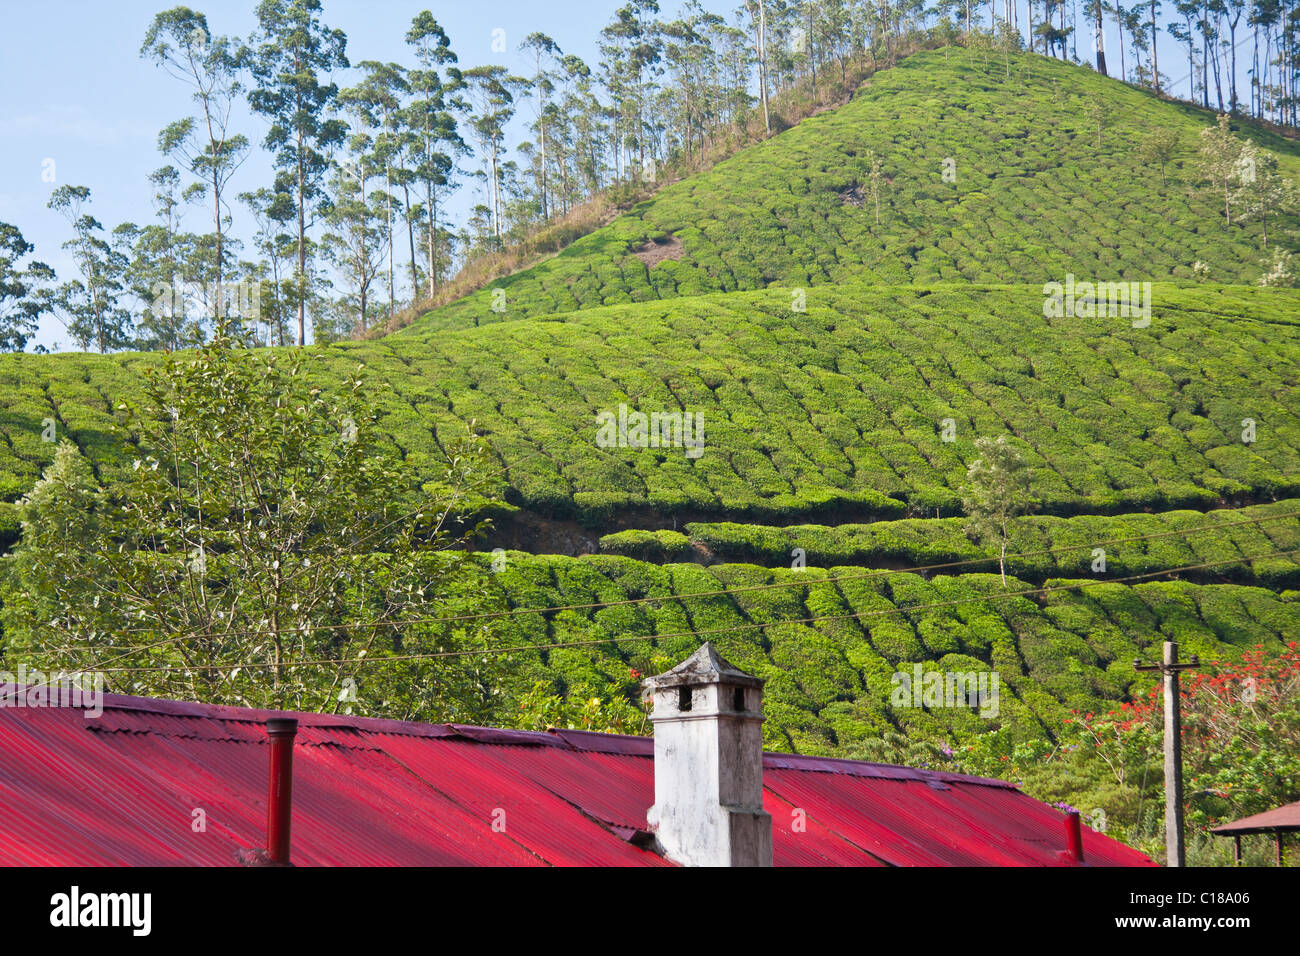 Tea plantations and red roof with chimney Stock Photo